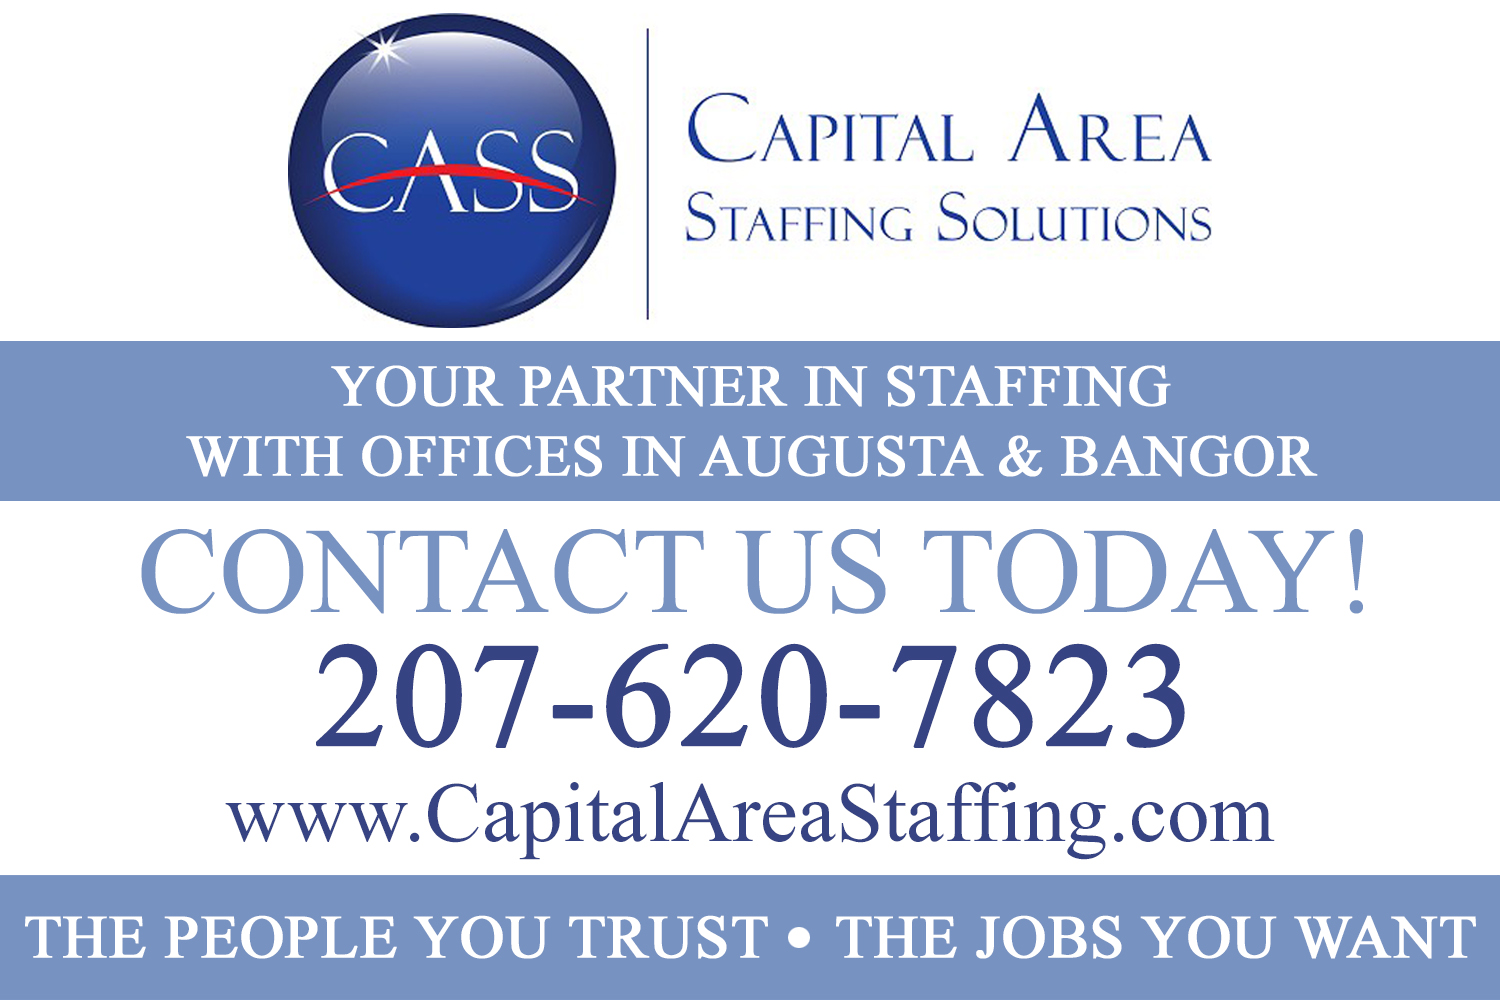 Capital Area Staffing Solutions